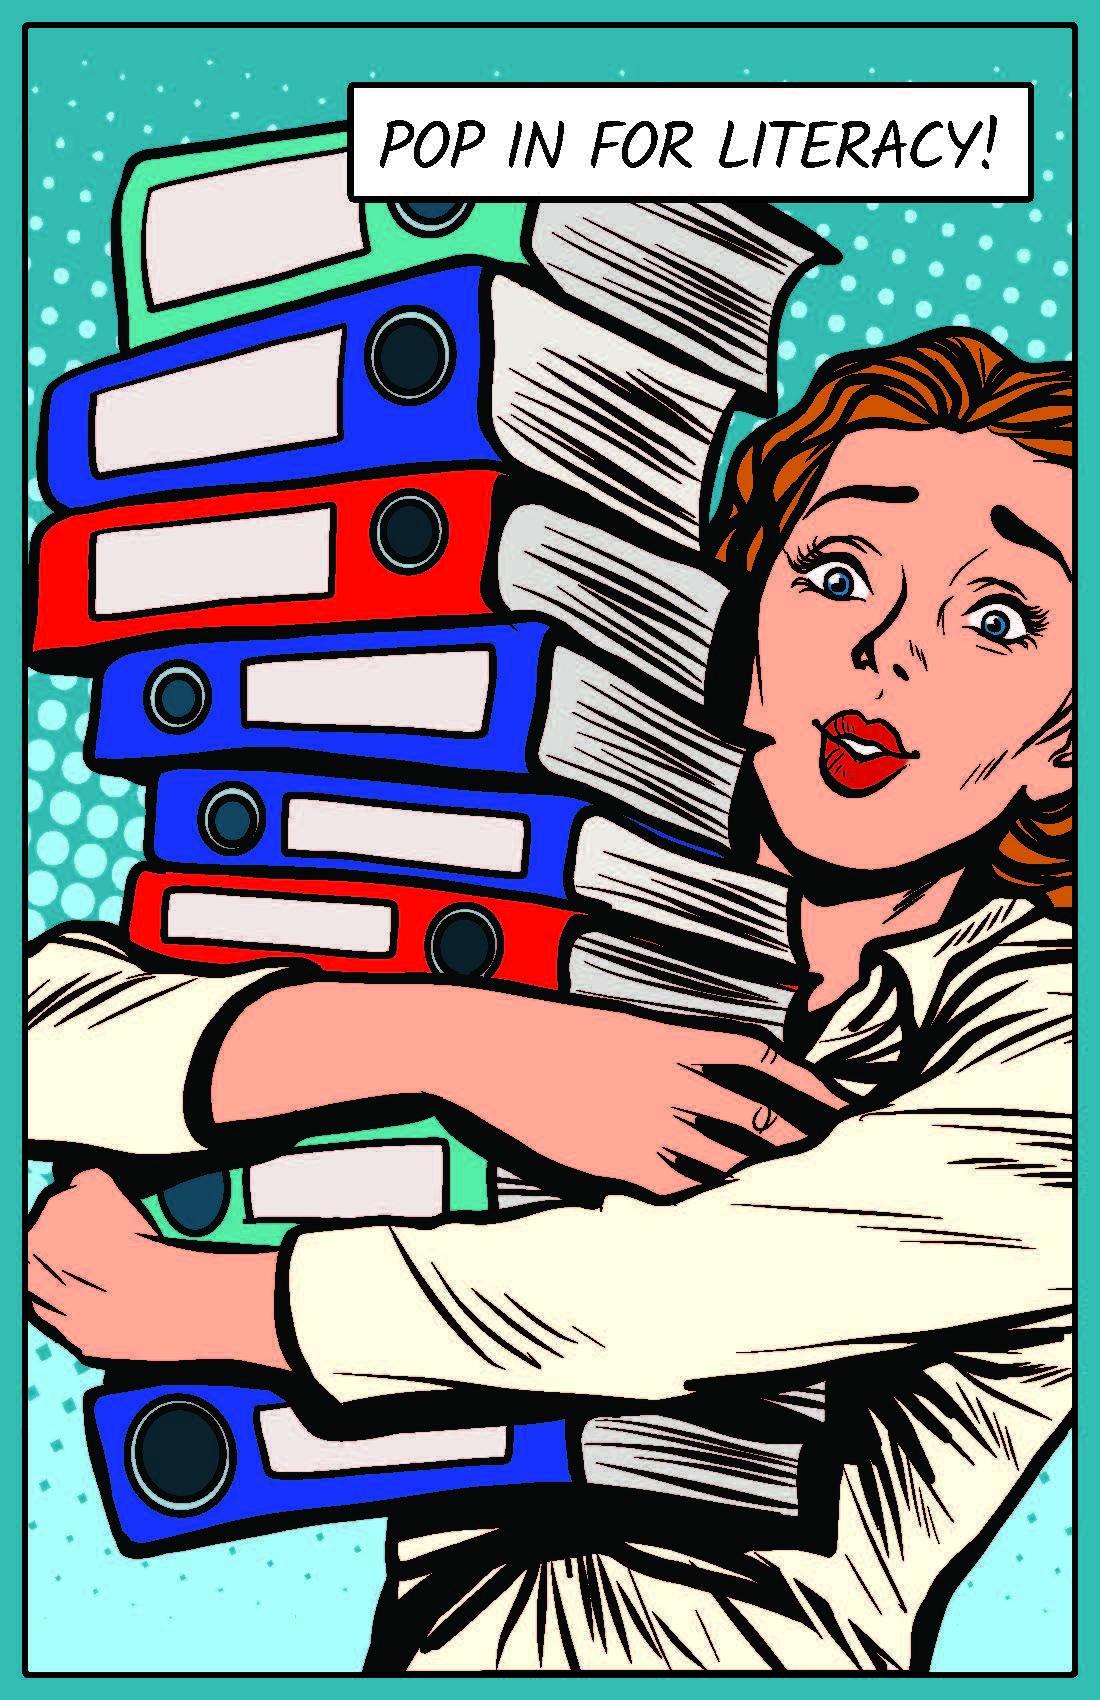 Pop in for literacy illustration pop art style woman with books